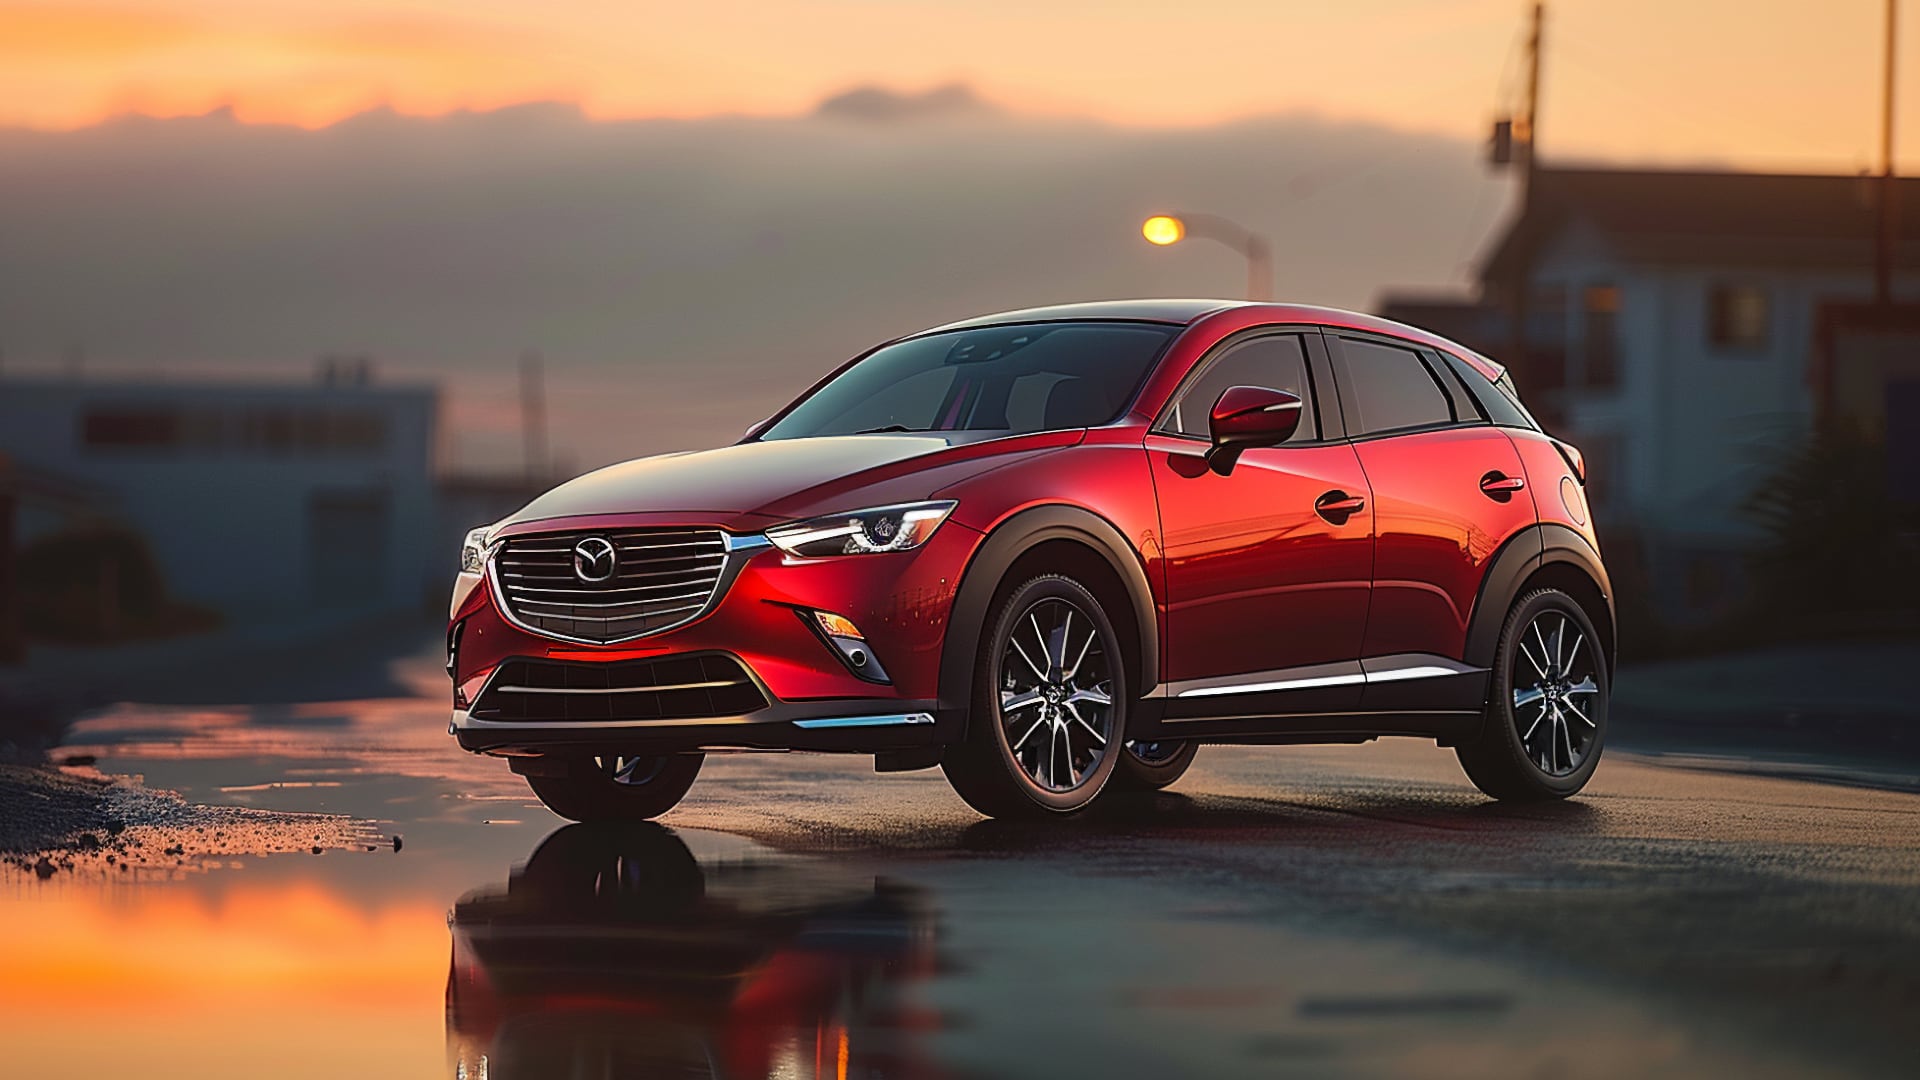 The red Mazda CX-3, driving down a street at sunset, is a model from one of the years to avoid.